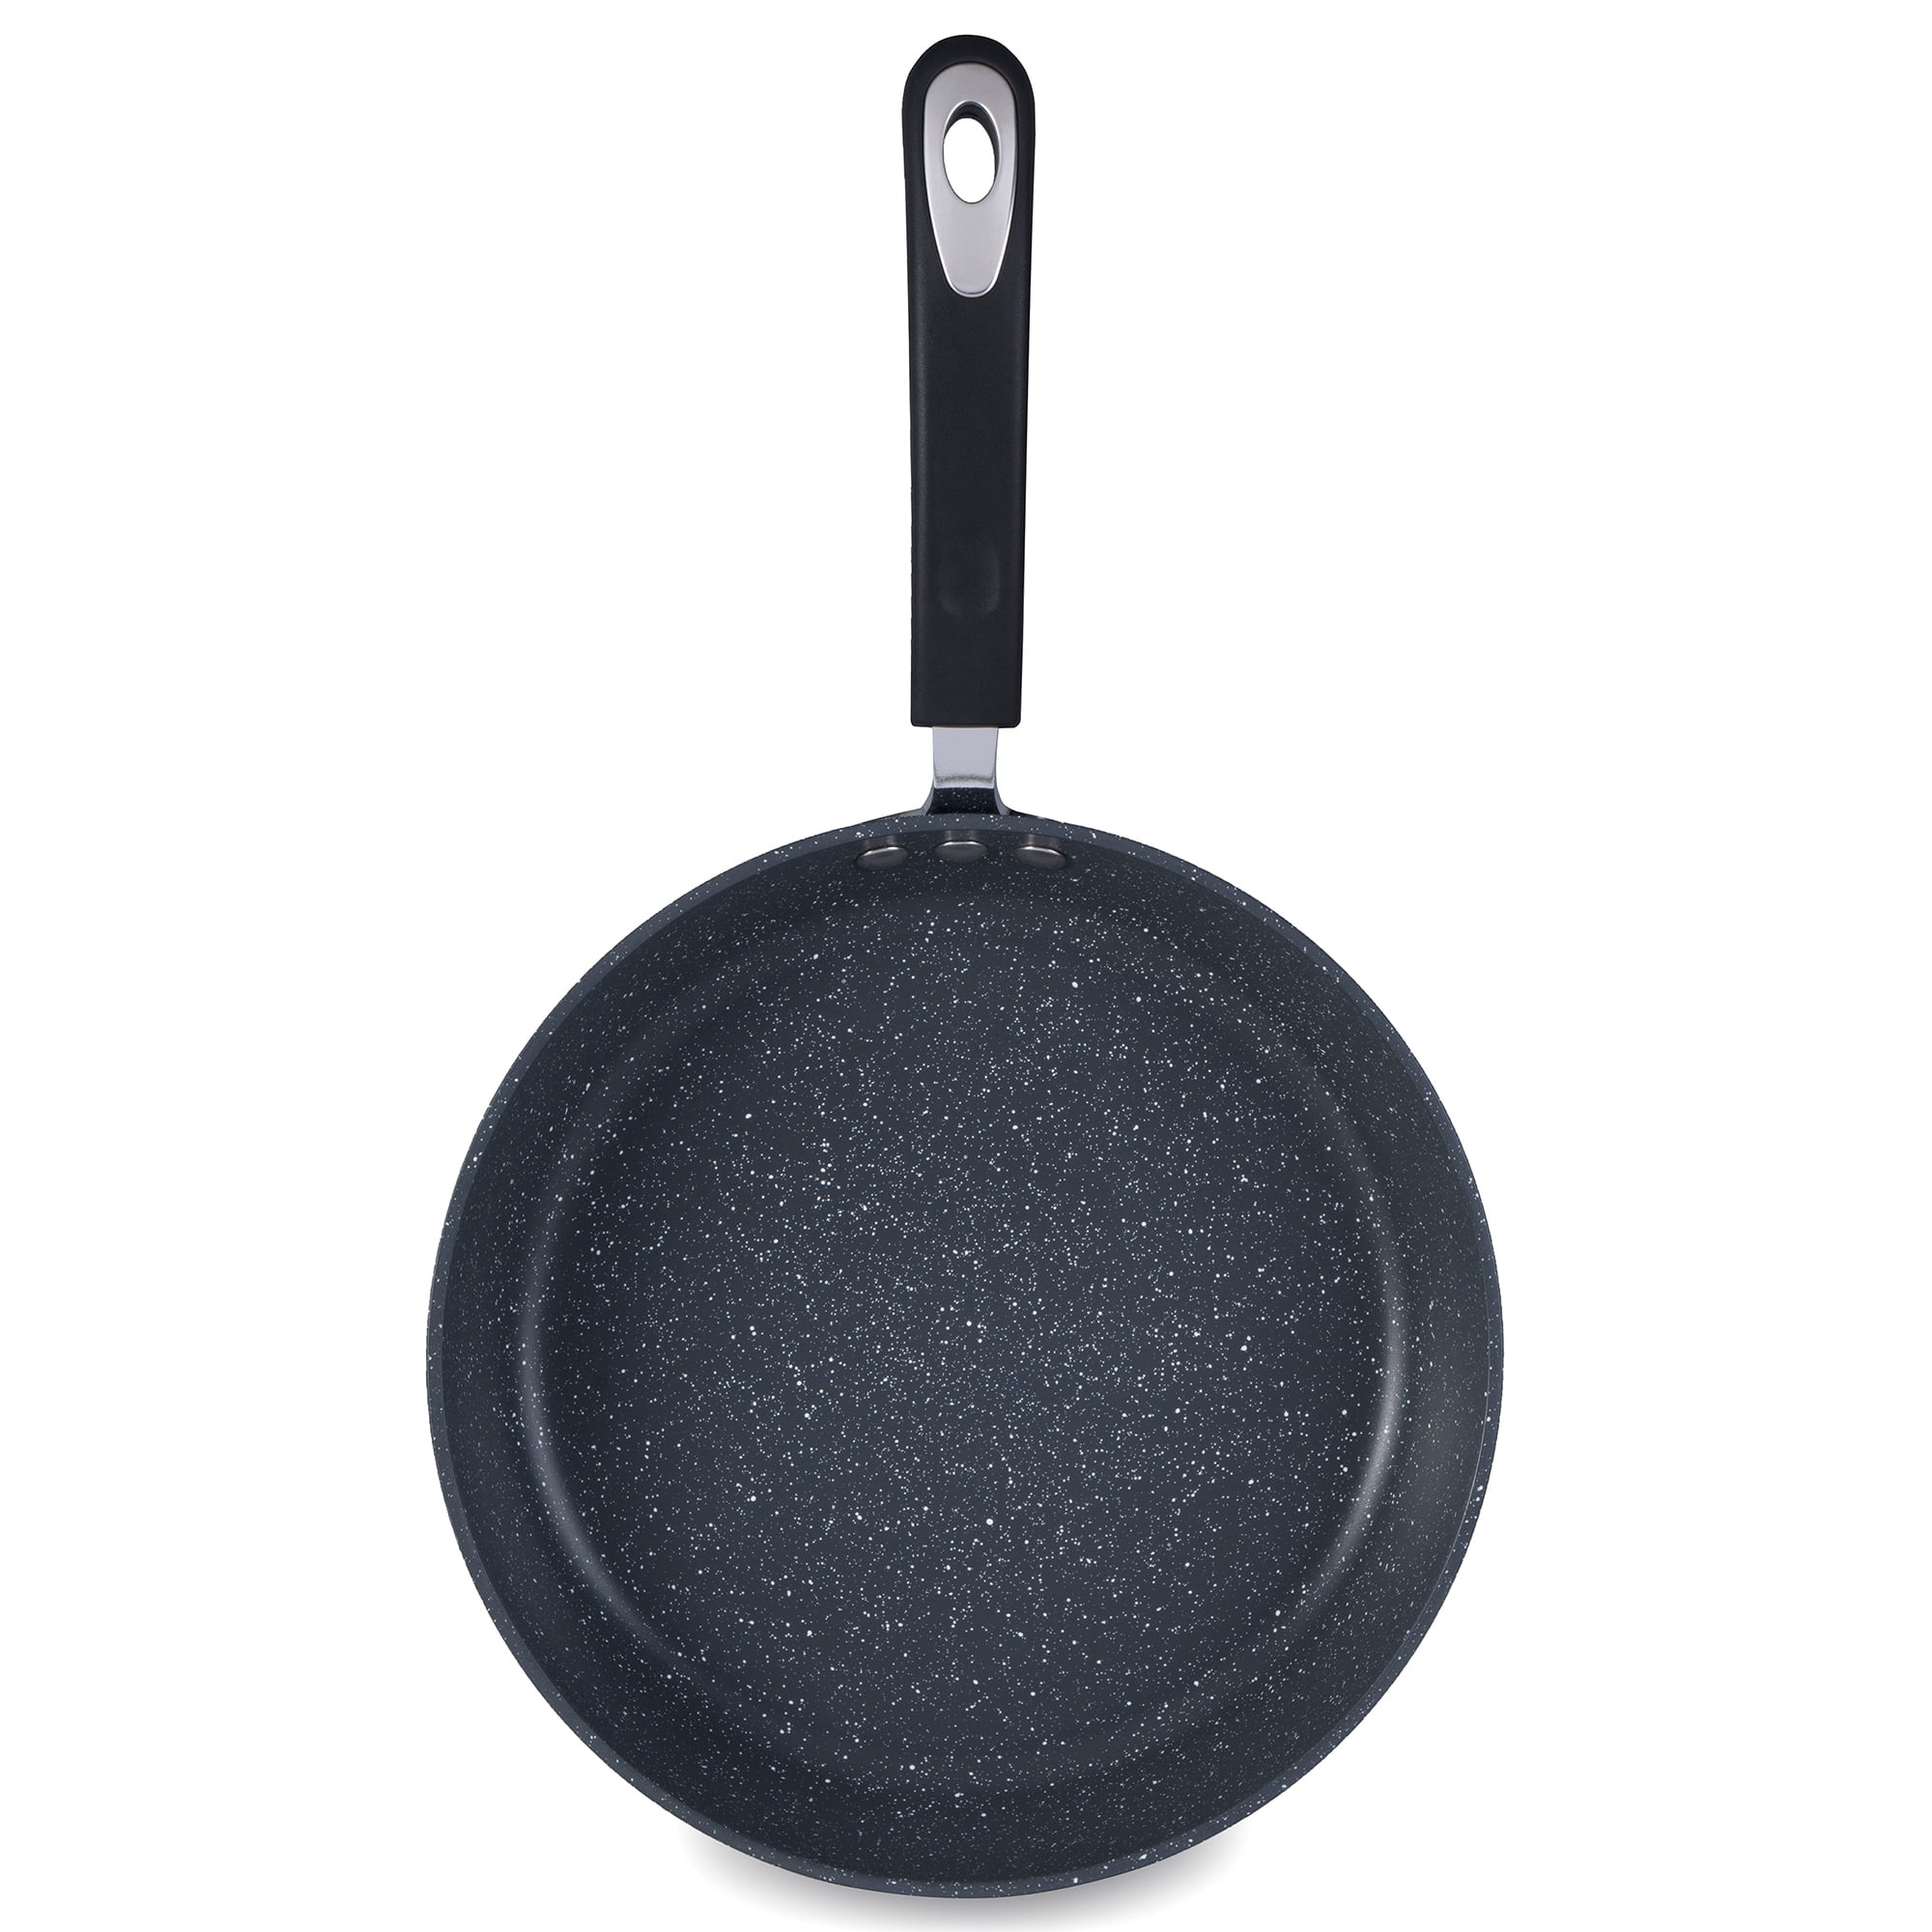 8 Small Frying Pan- KOCH SYSTEME CS 8 Ultra Nonstick Frying Pan with Lid,  Granite Skillet with APEO & PFOA-Free Stone Earth Coating, Aluminum Alloy